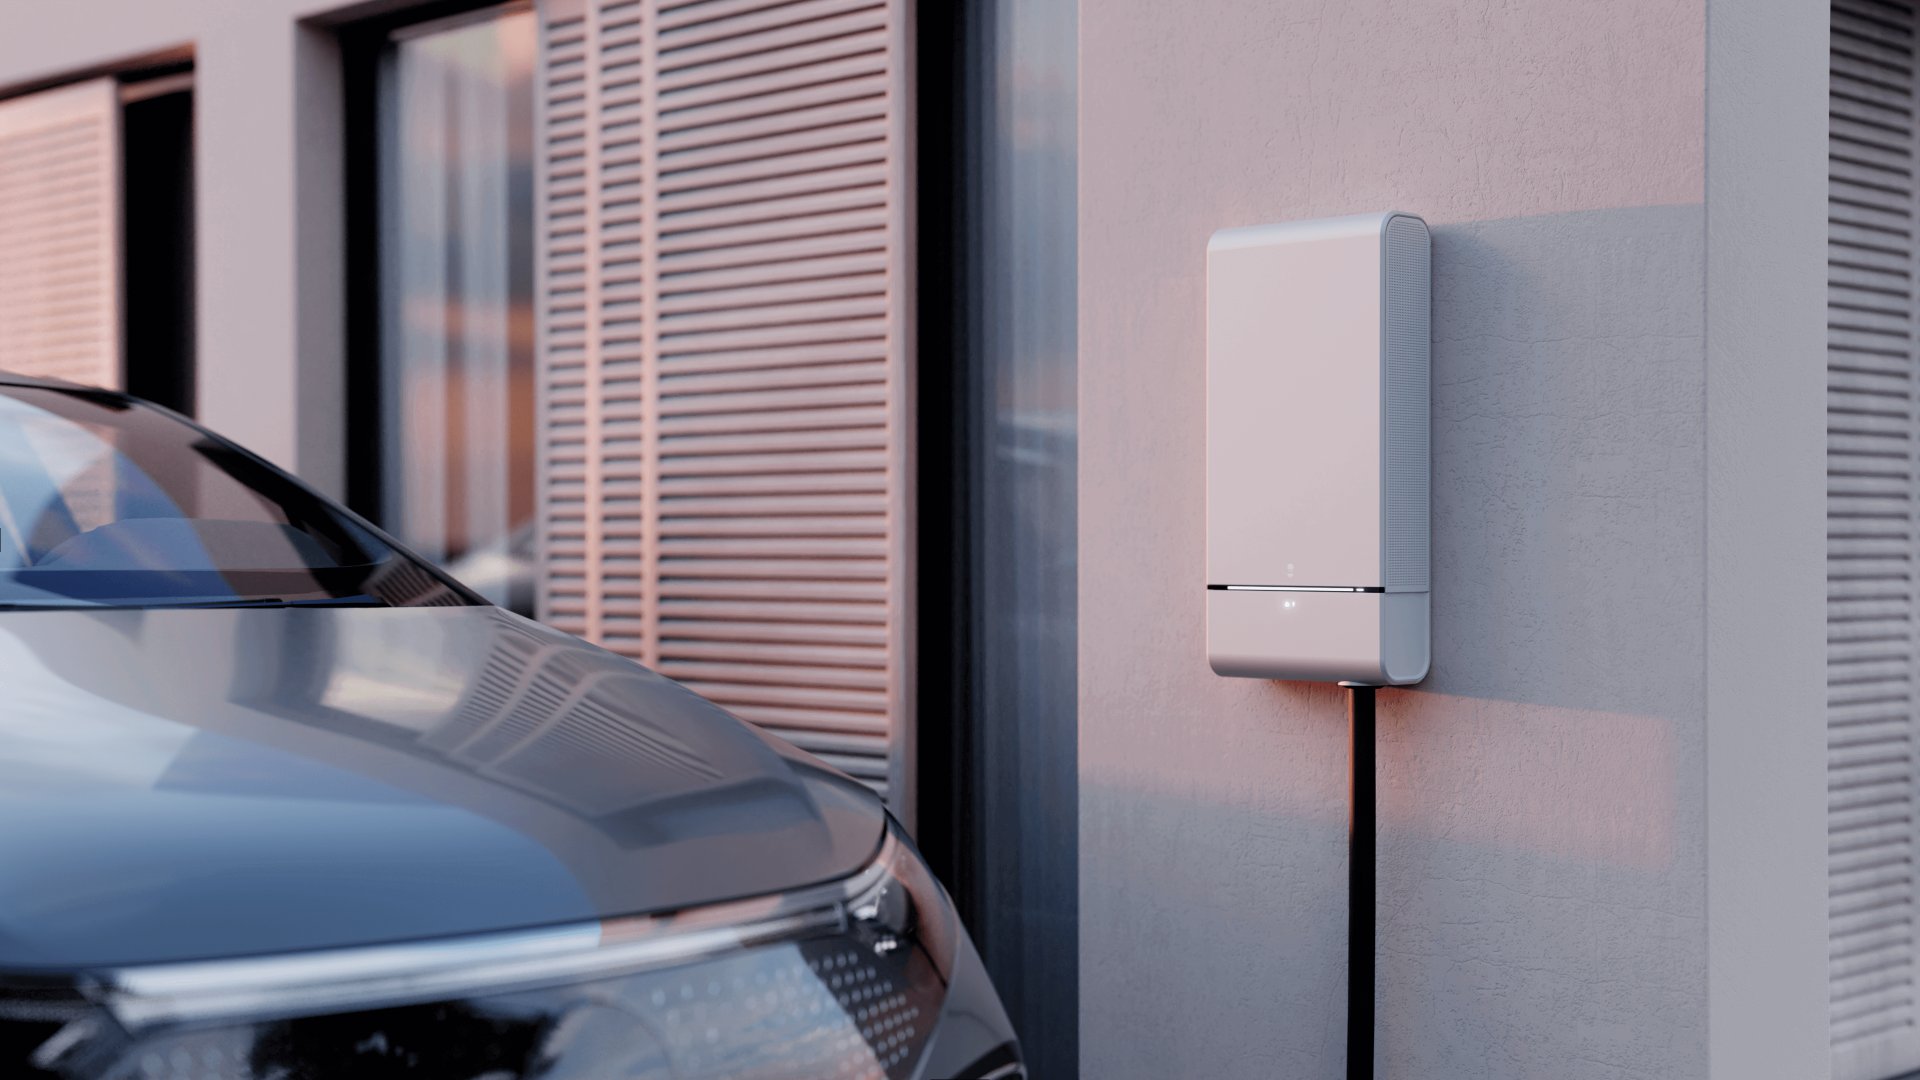 this wall box allows your electric car to power the entire house in emergencies